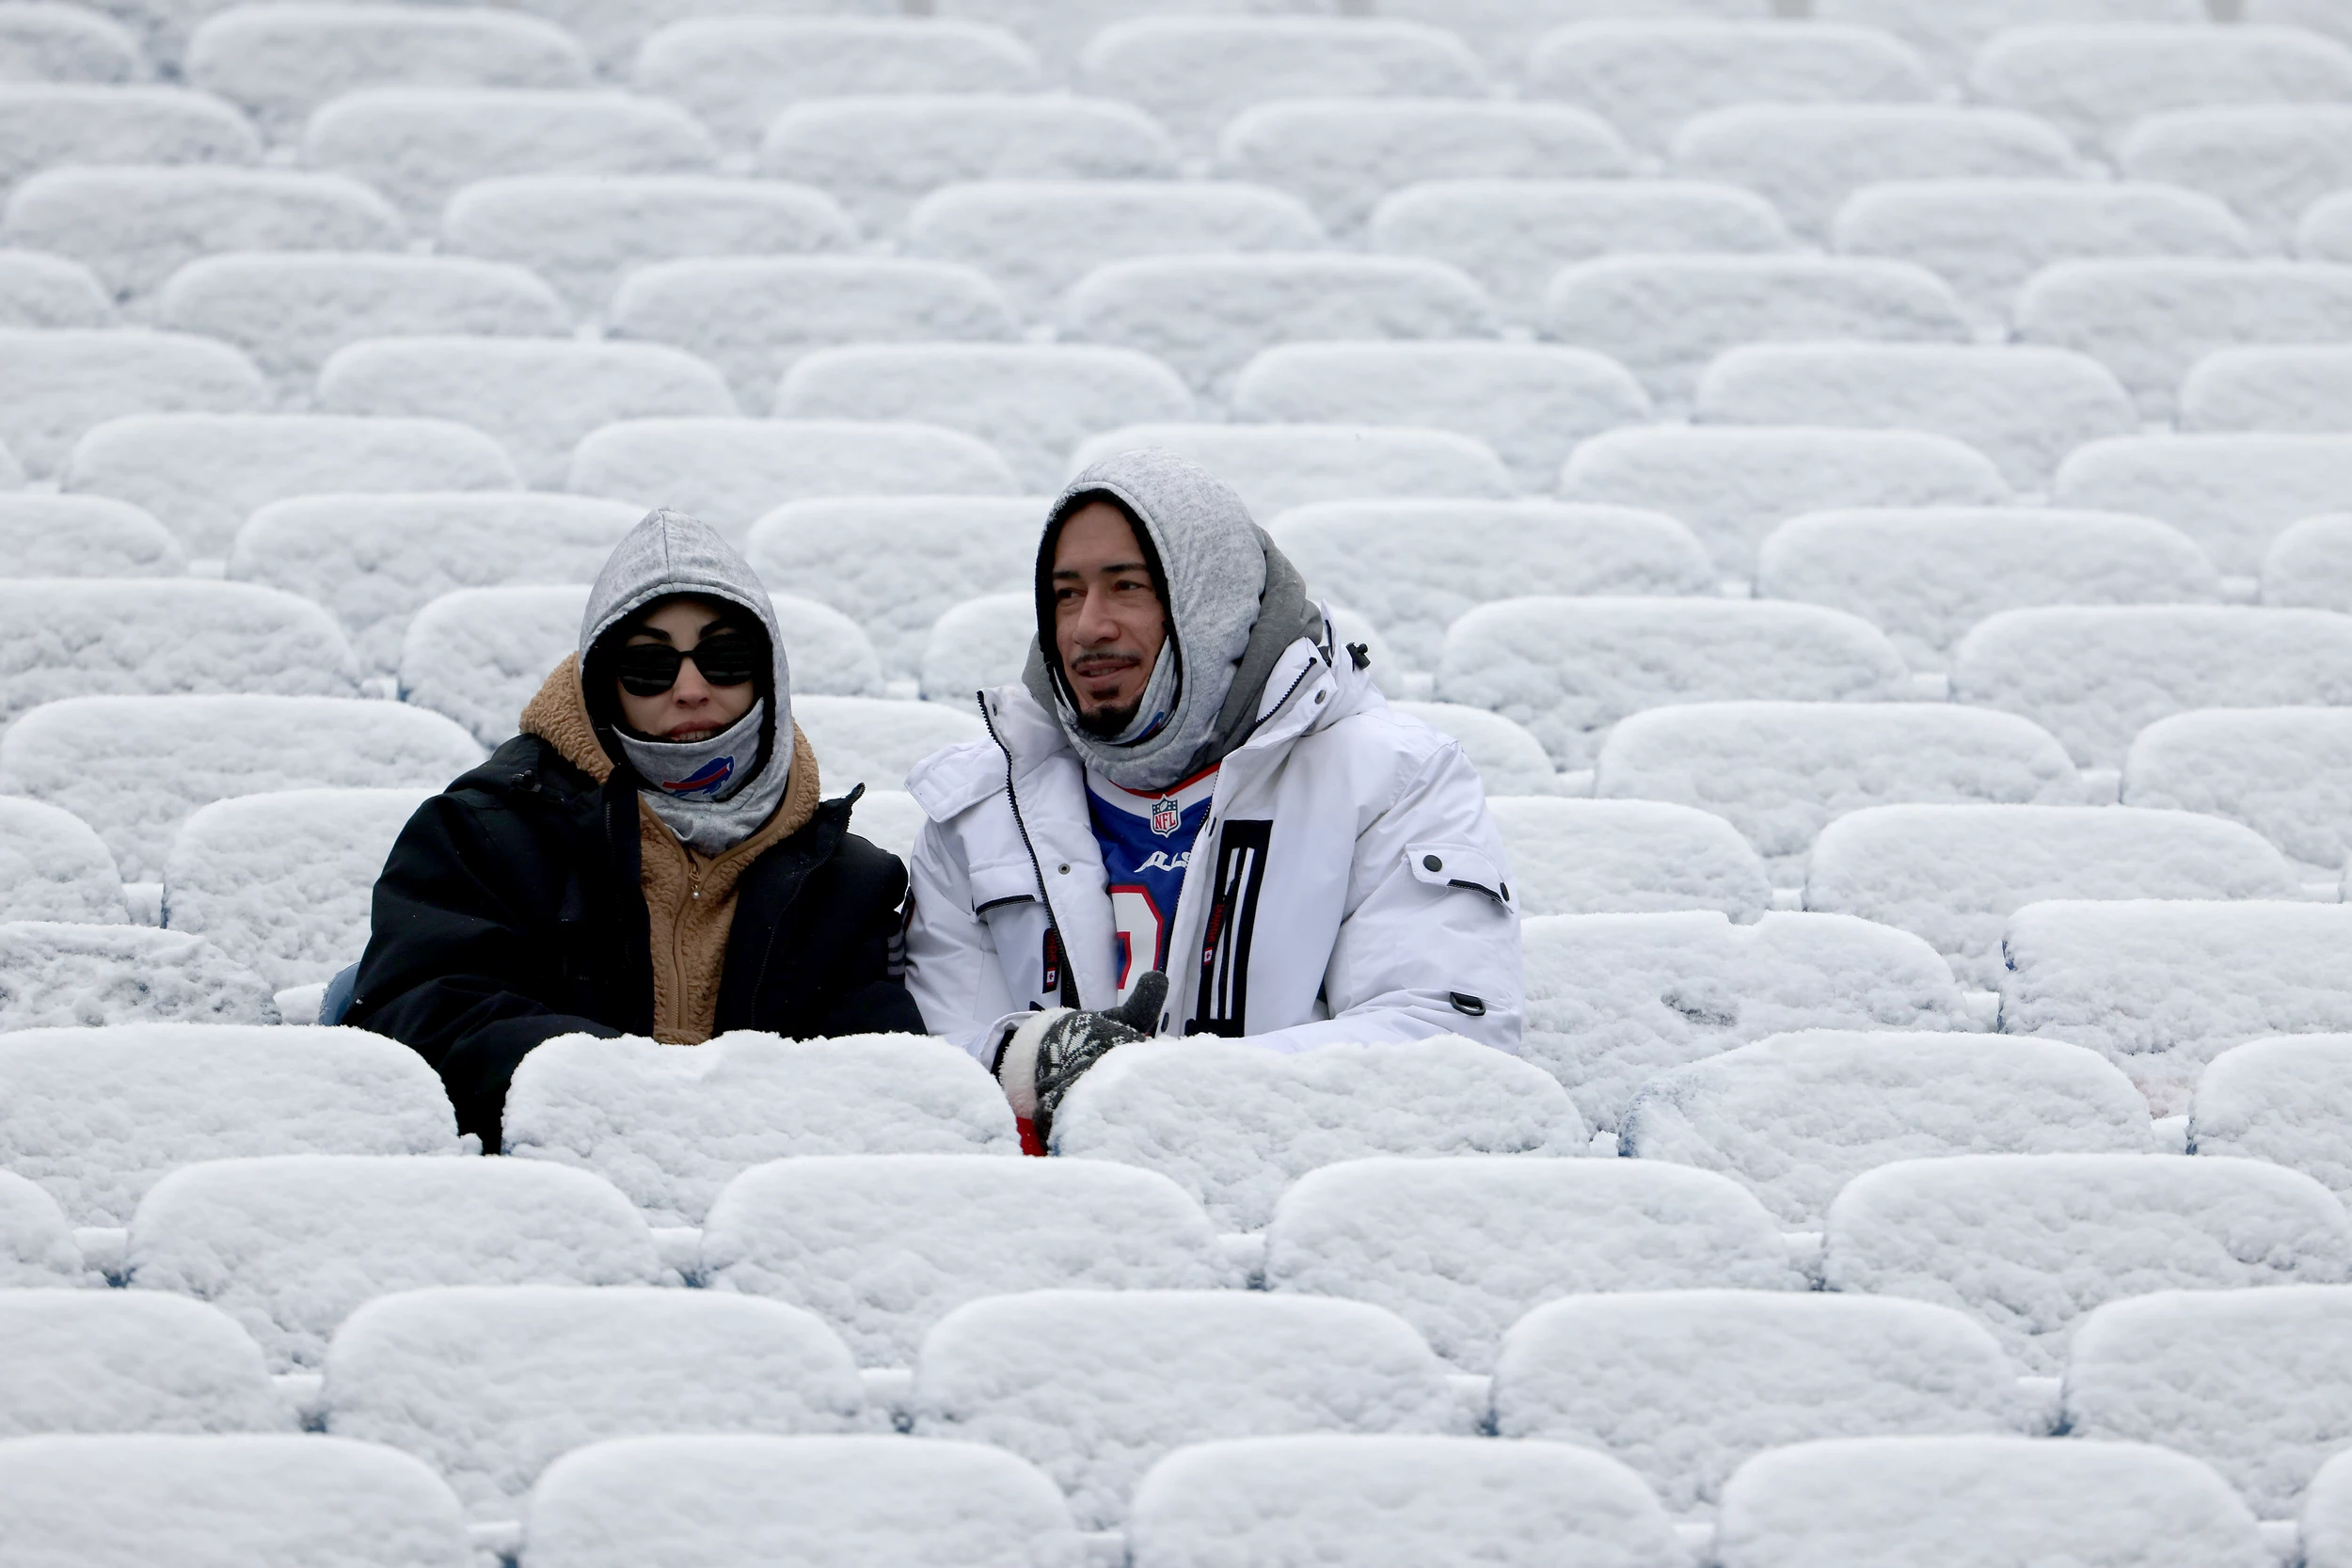 Buffalo Bills Ticket Prices Plummeting, EXTREMELY CHEAP